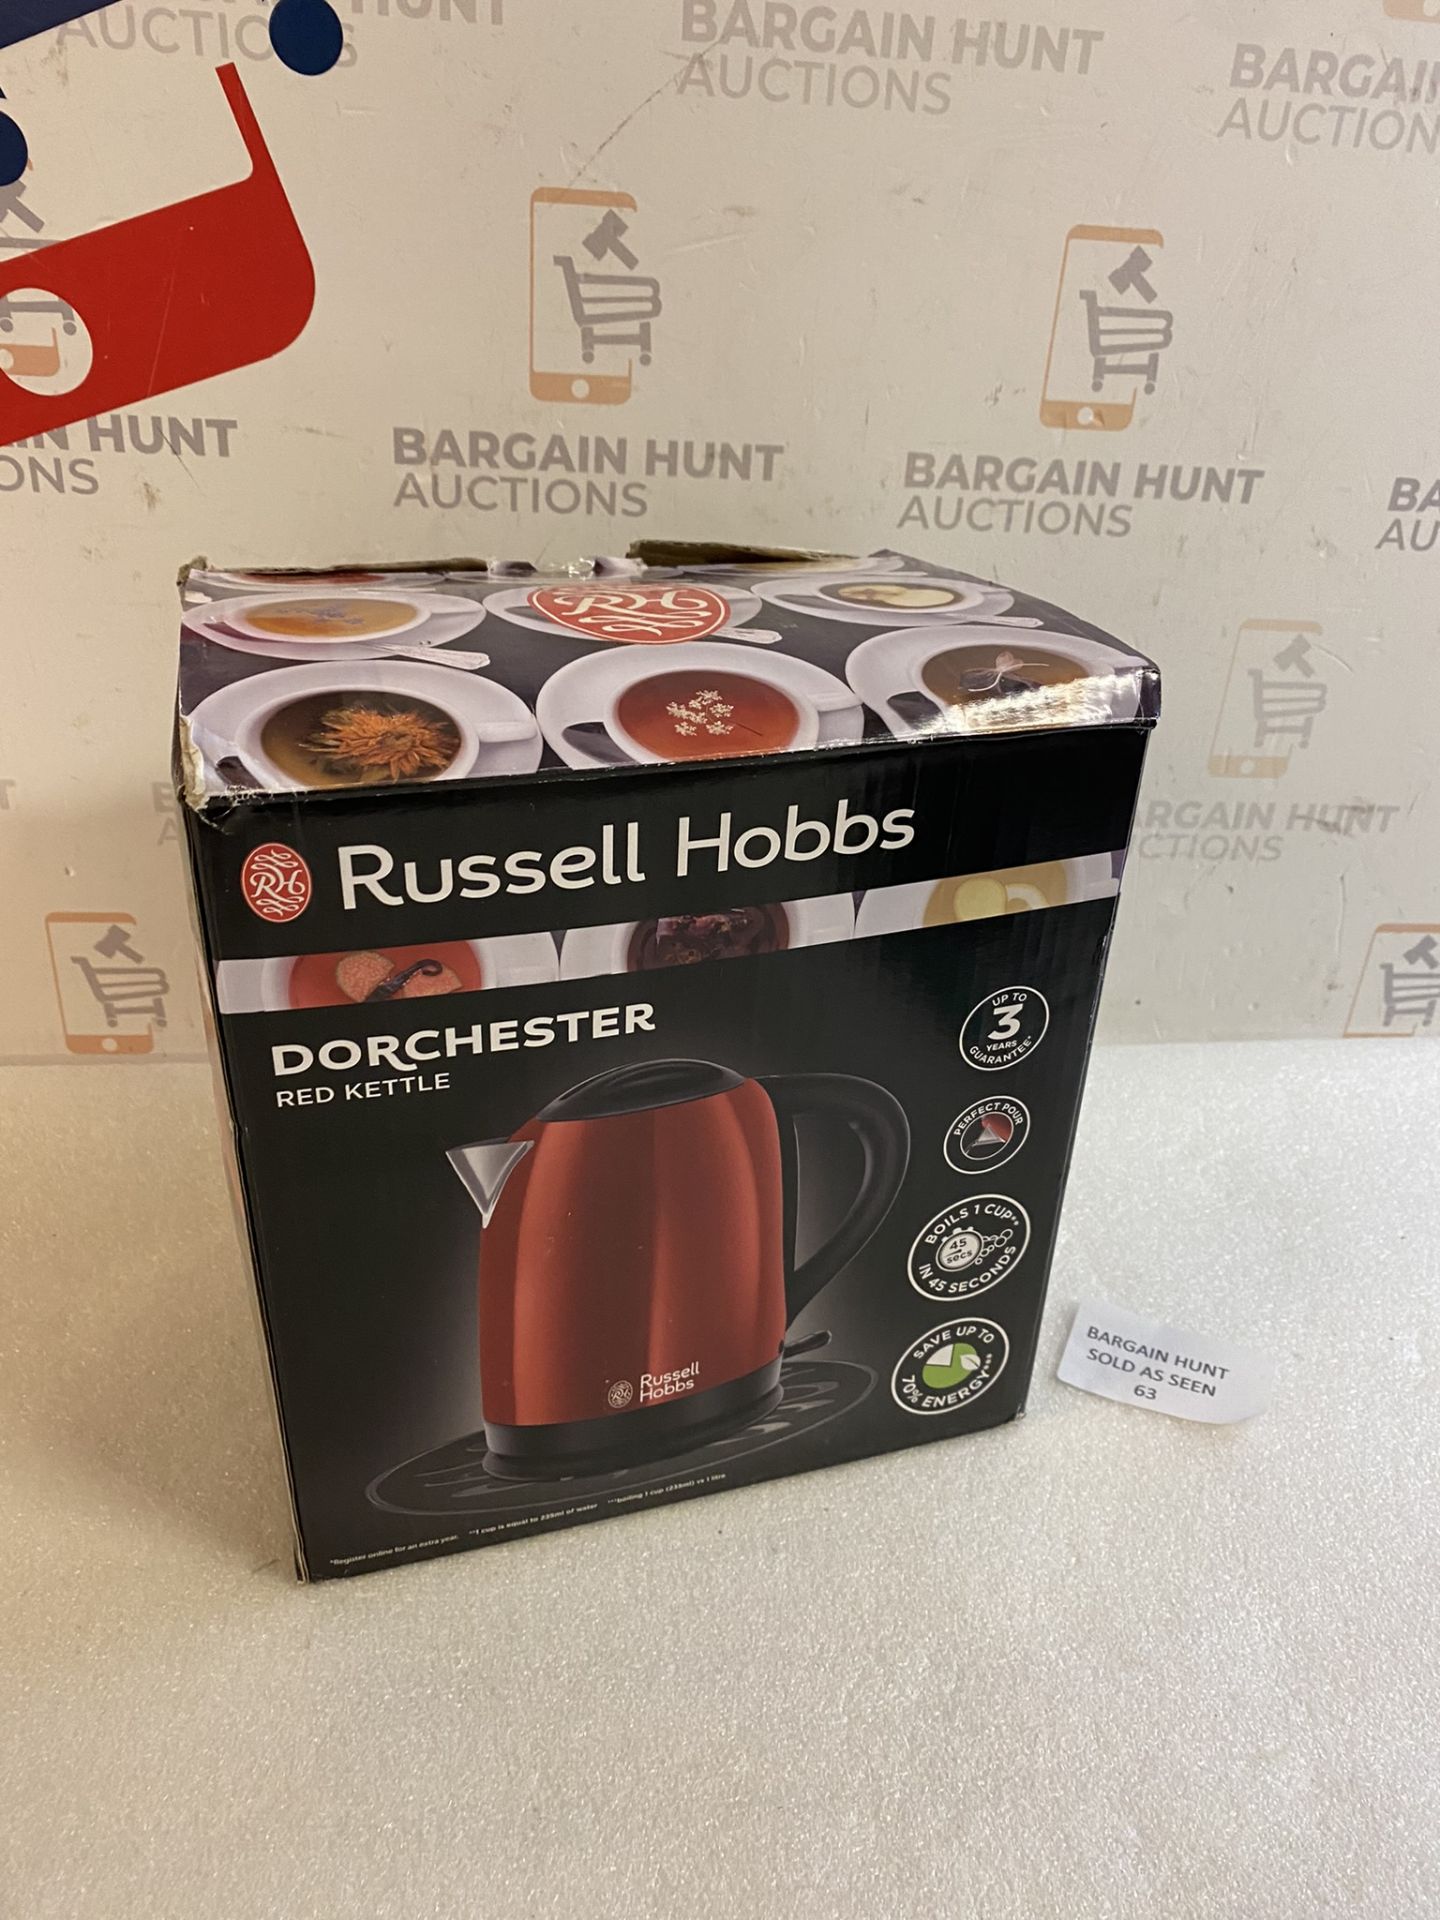 Russell Hobbs Dorchester Kettle Red 1.7L RRP £38.99